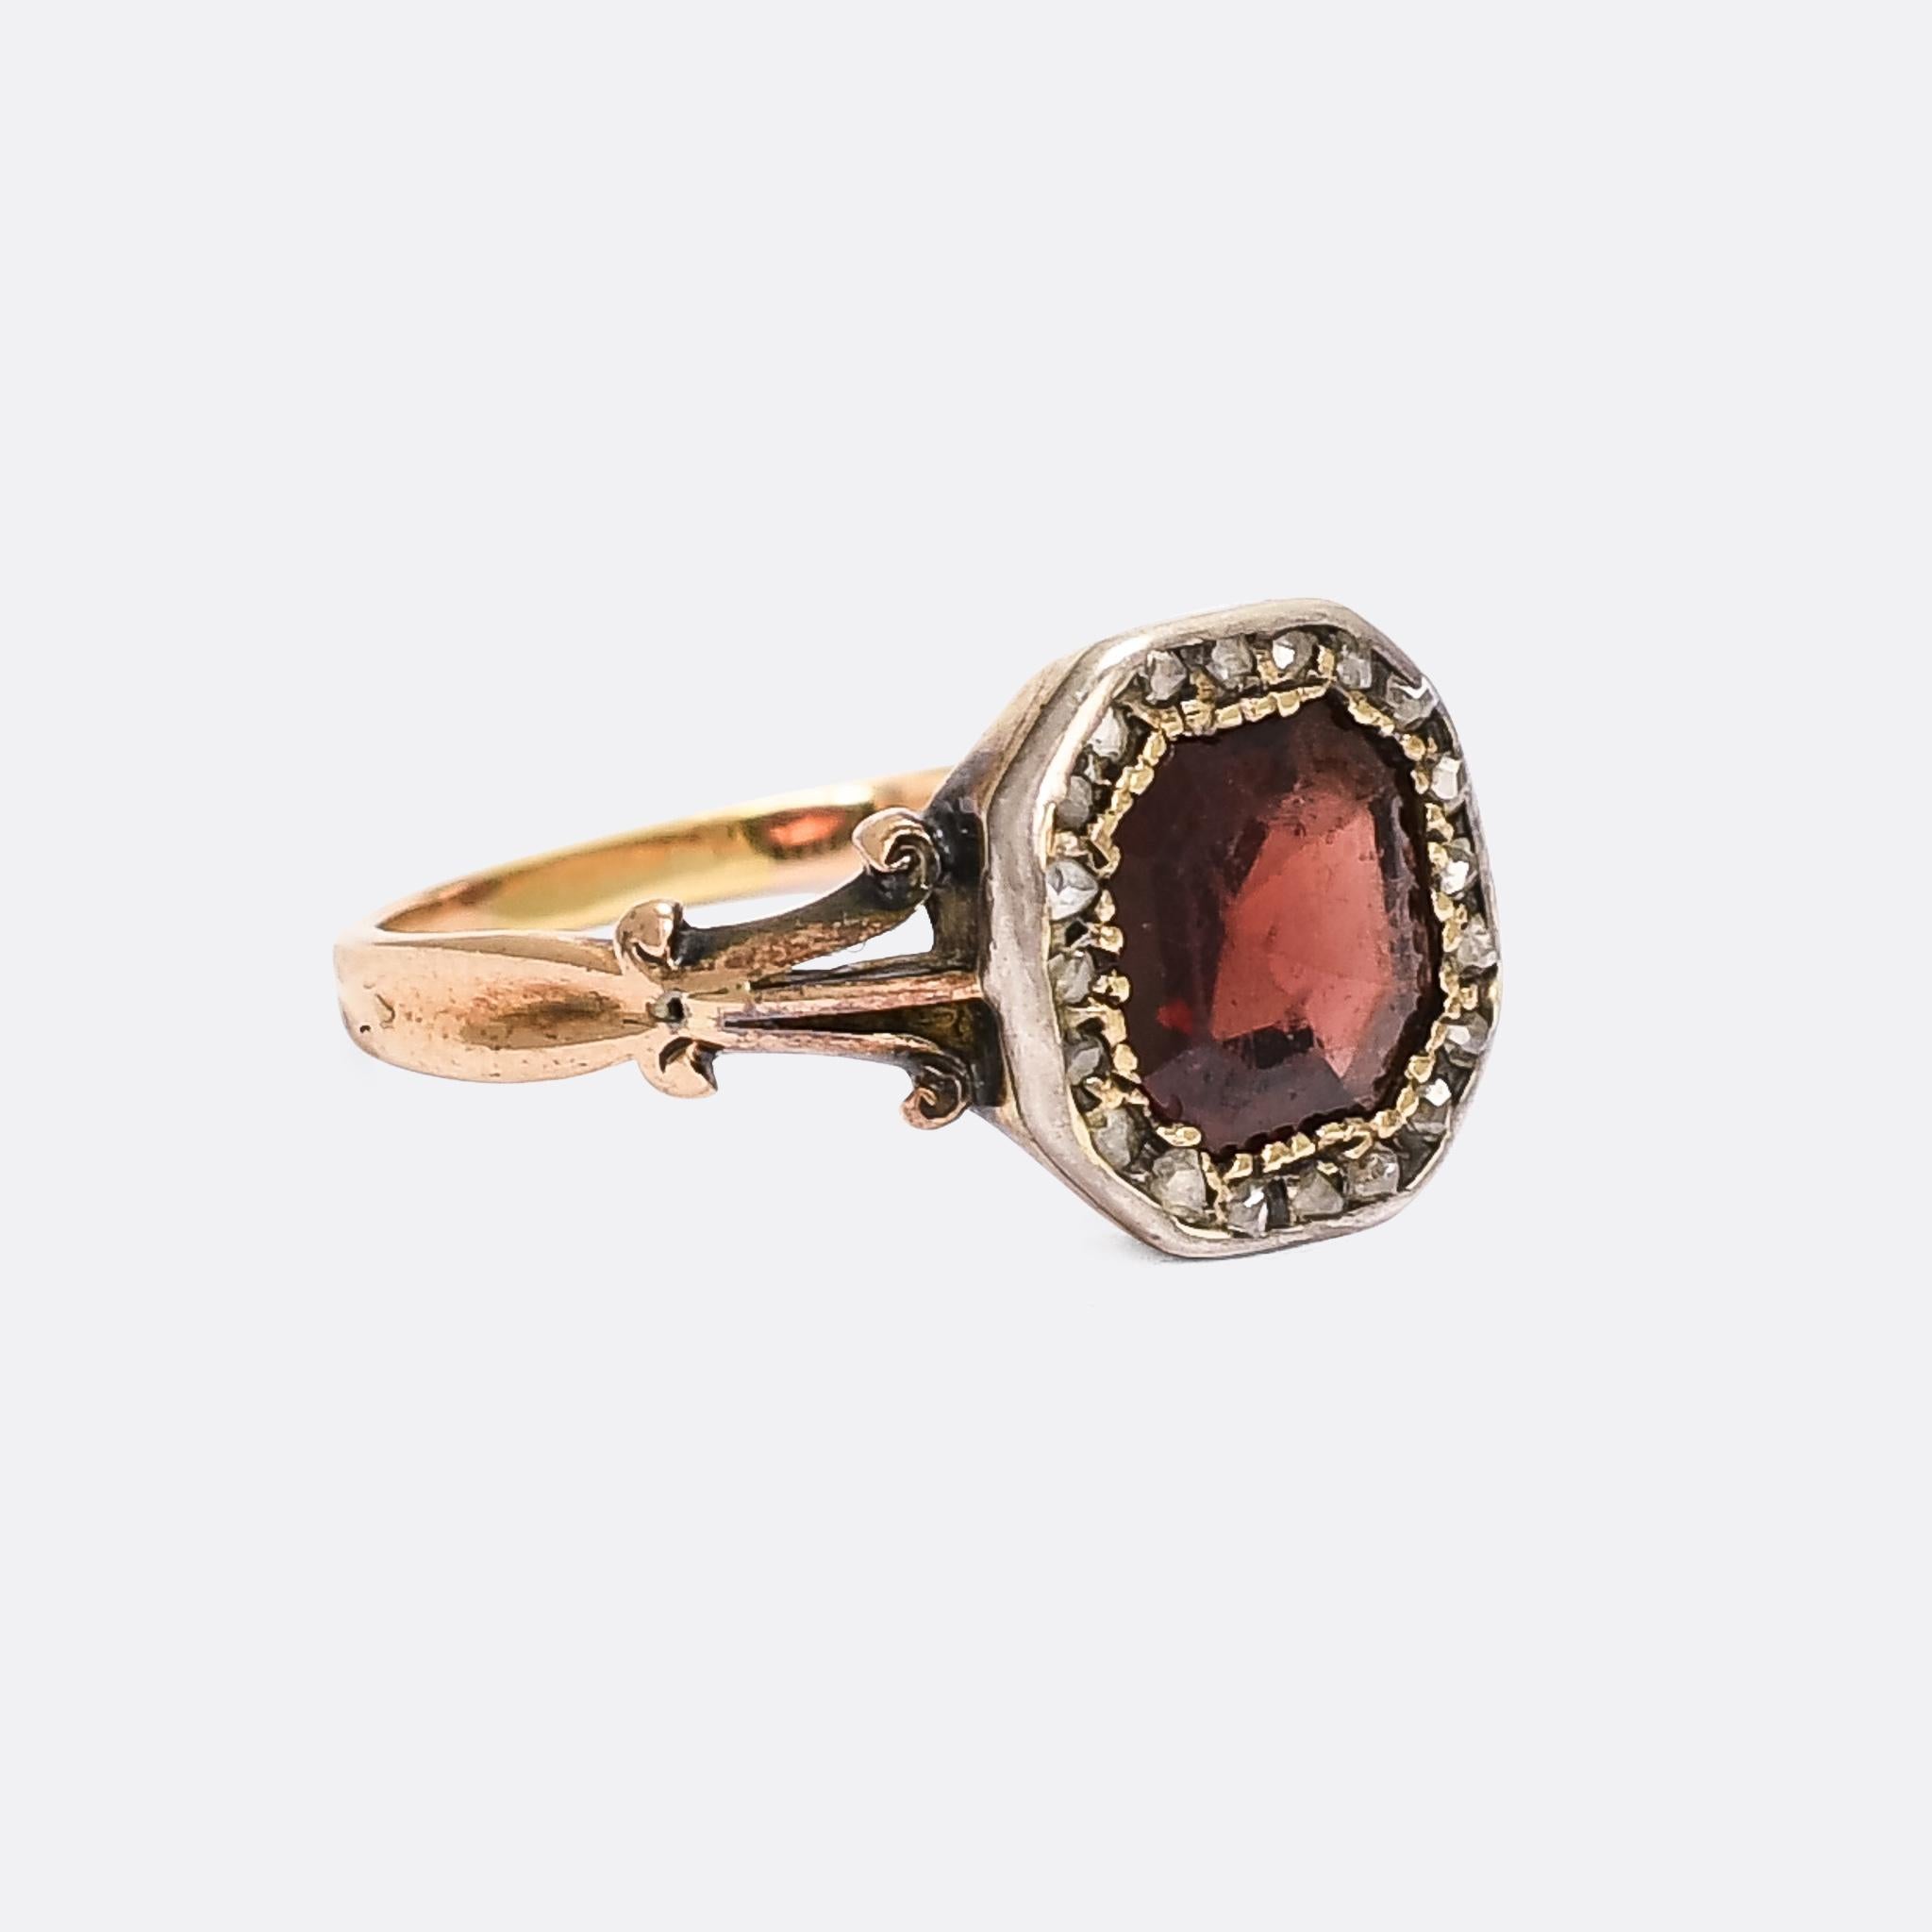 This remarkable ring is 200 years old (give or take...). It dates from the late Georgian period, circa 1820, and remains in great condition considering. It's set with a octagonal flat cut garnet, displaying a vivid red hue and surrounded by a halo